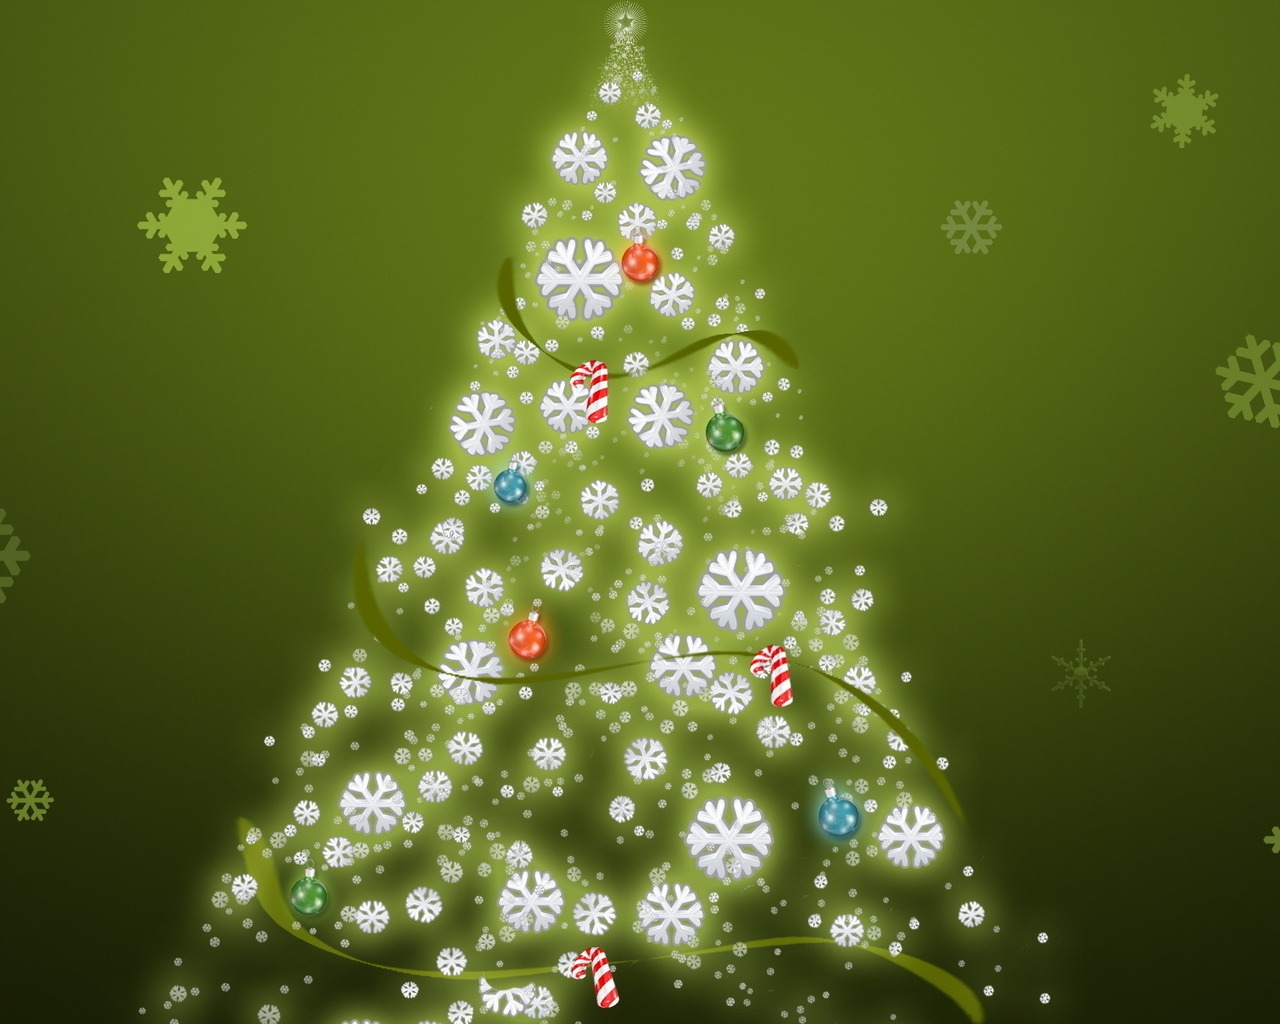 Its Just a Christmas Tree for 1280 x 1024 resolution